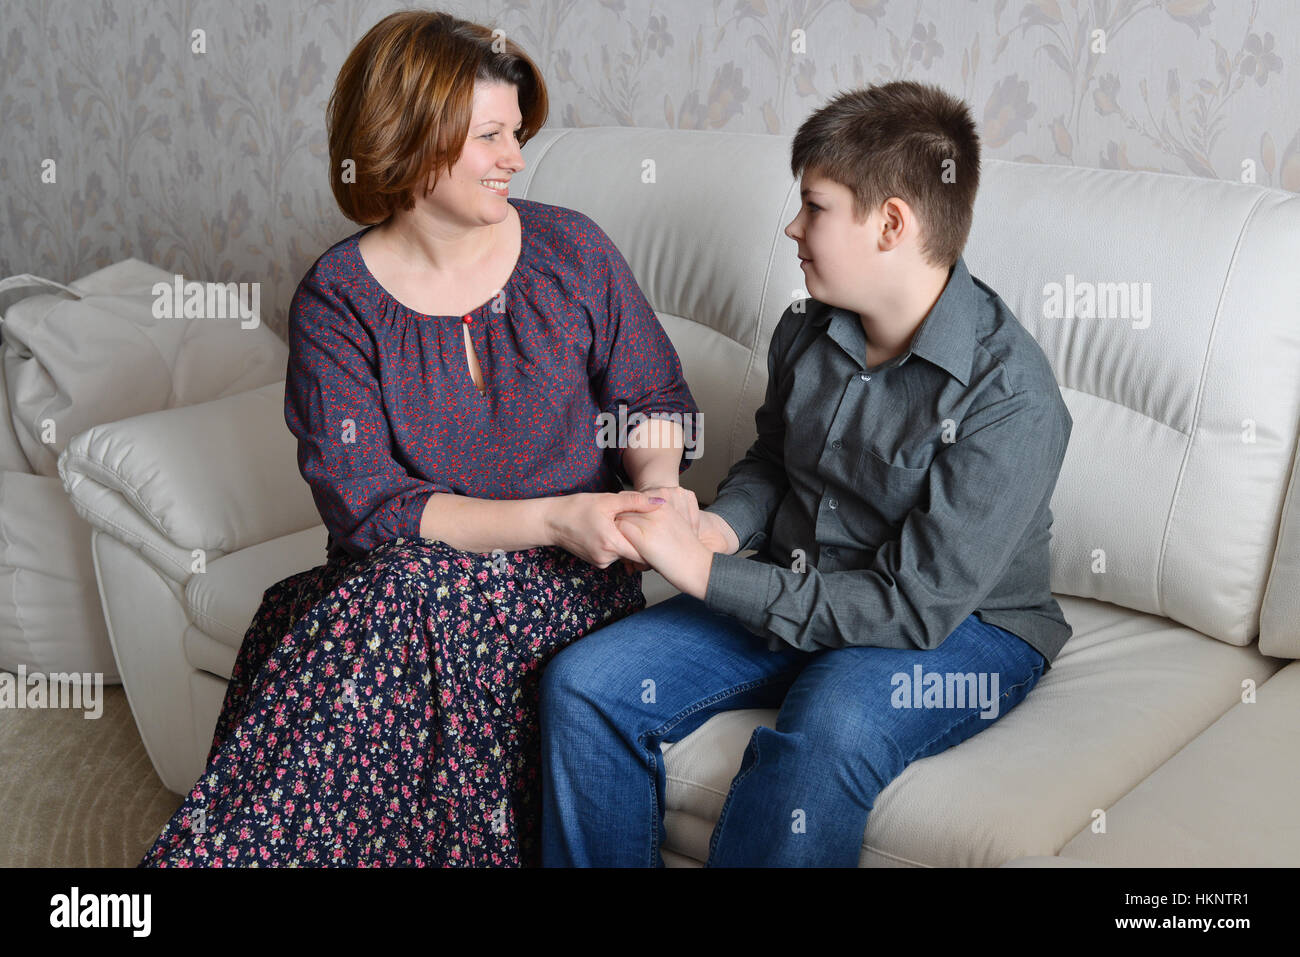 Mother and son hold hands and look at each other Stock Photo